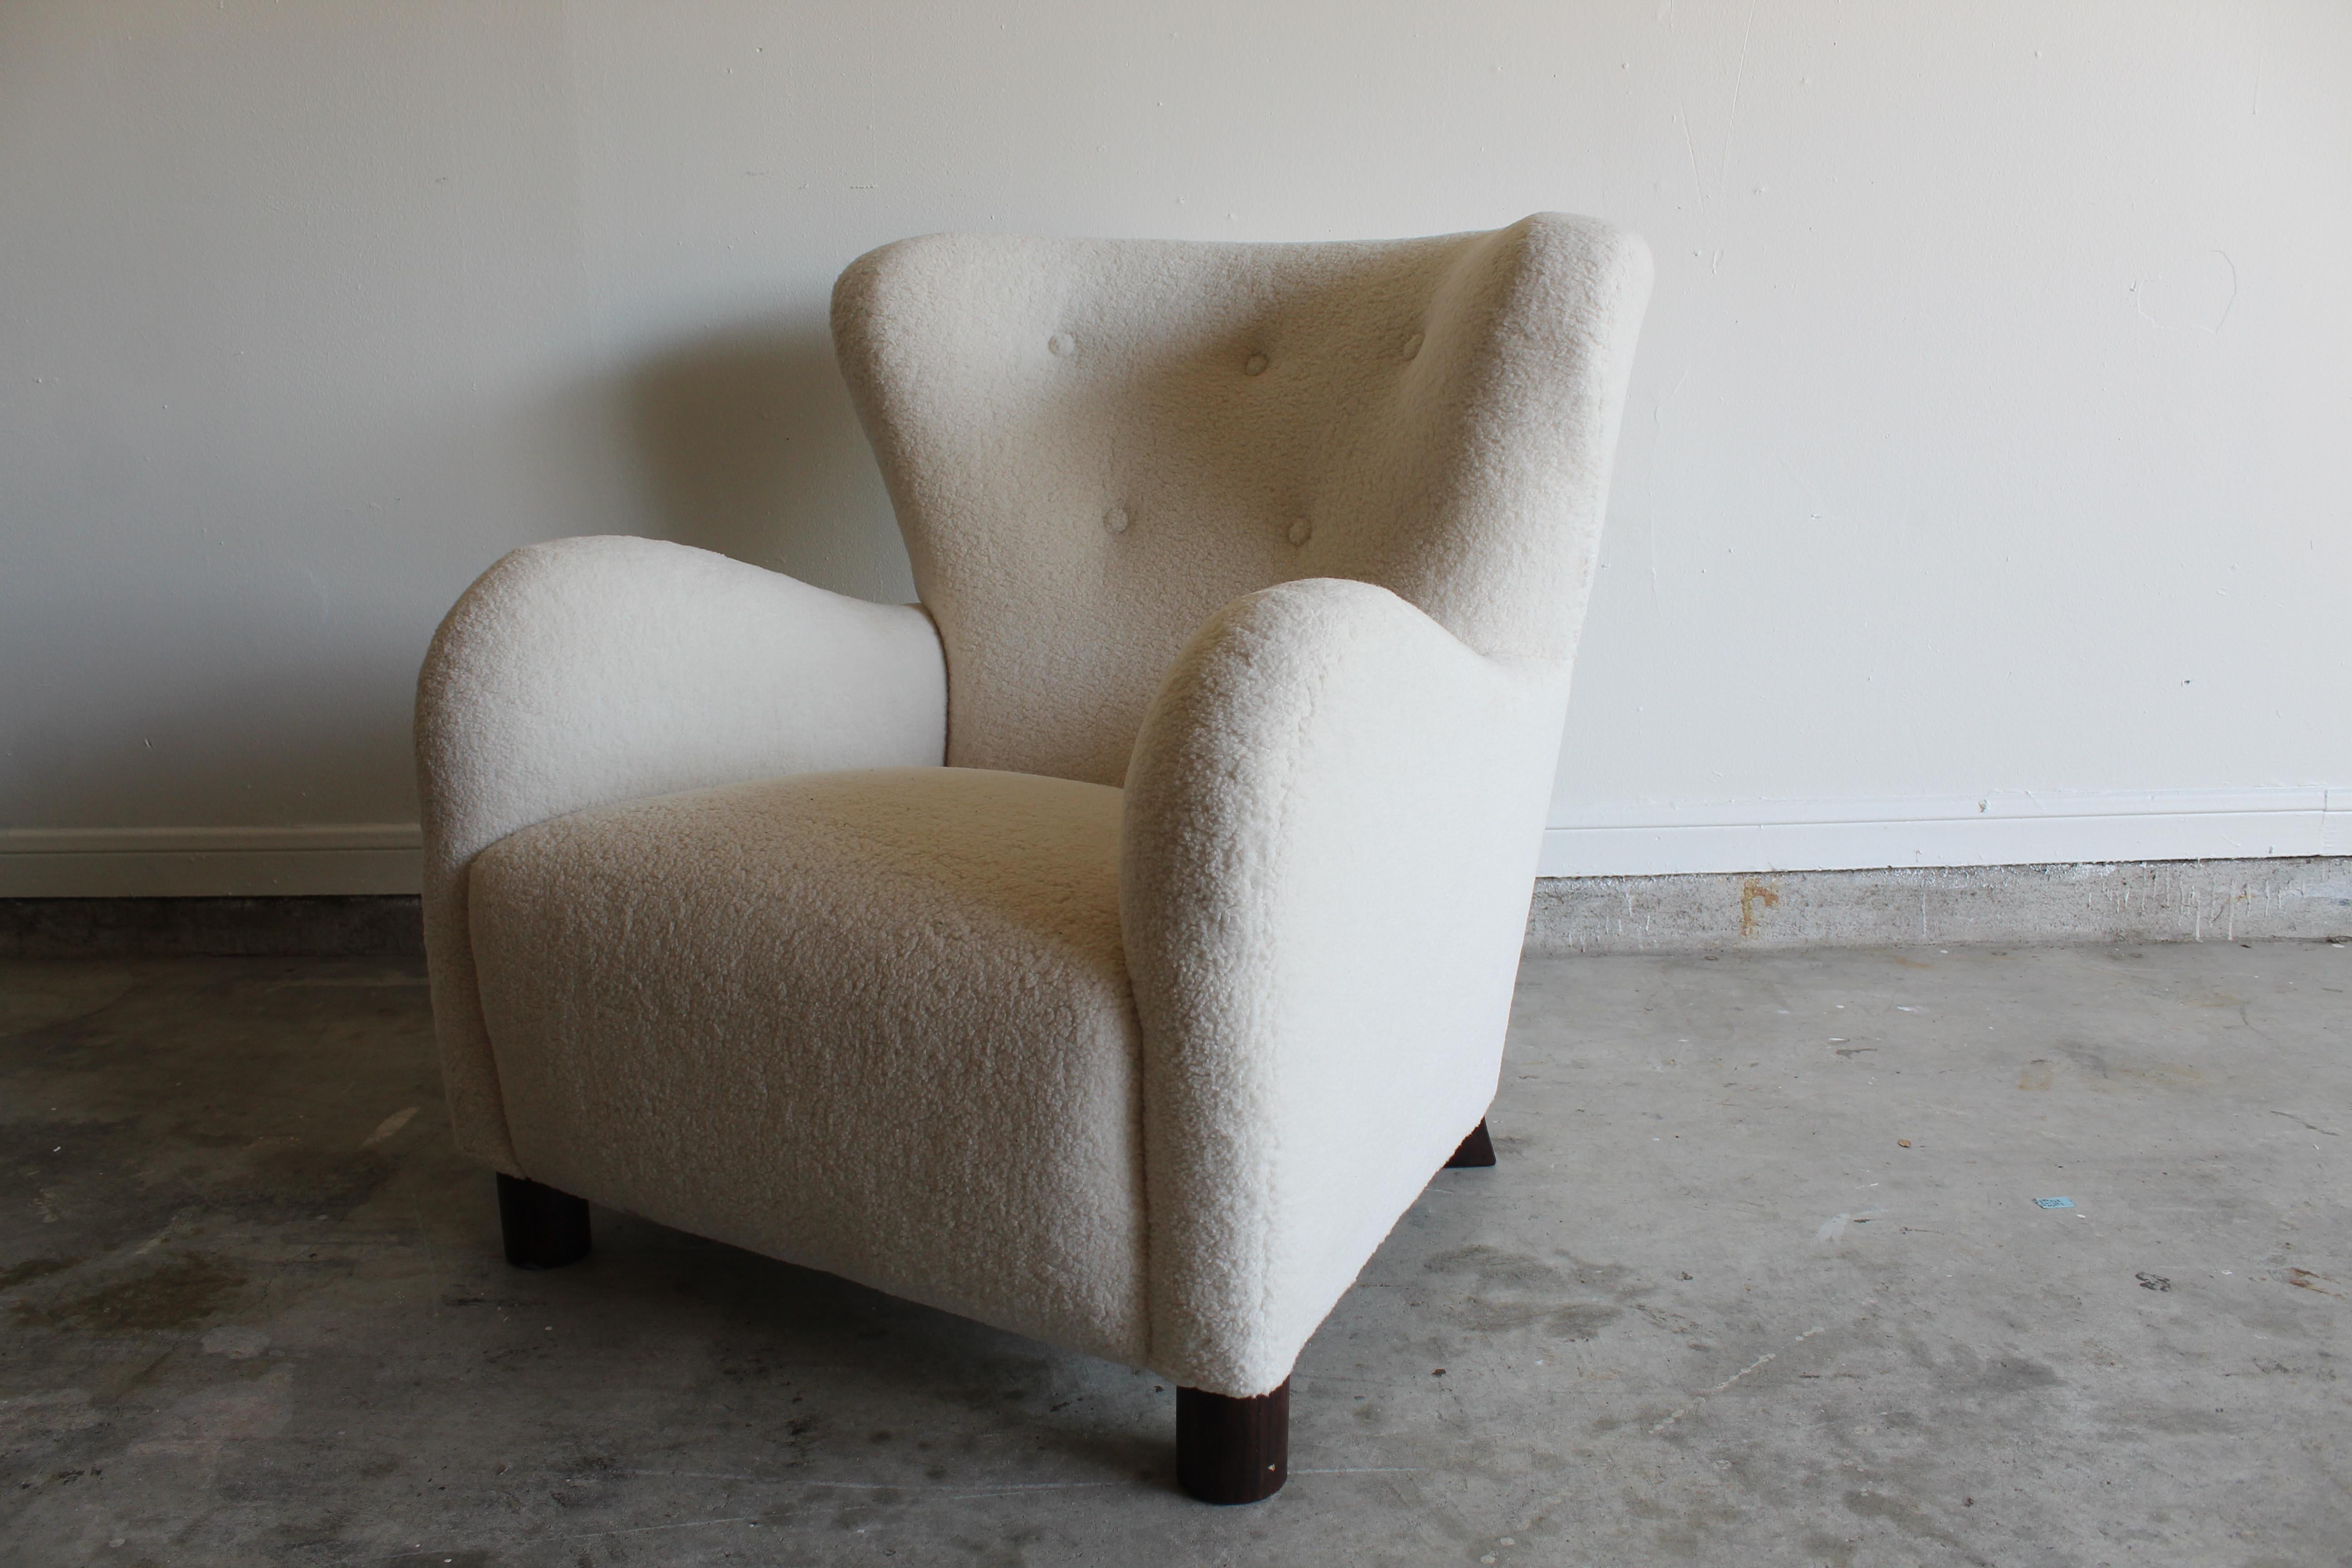 Stunning French club chair produced in the early 2000s in the style of the 1940s. Nice furry sheepskin upholstery with walnut legs. Minor scratches on legs upholstery in amazing condition.